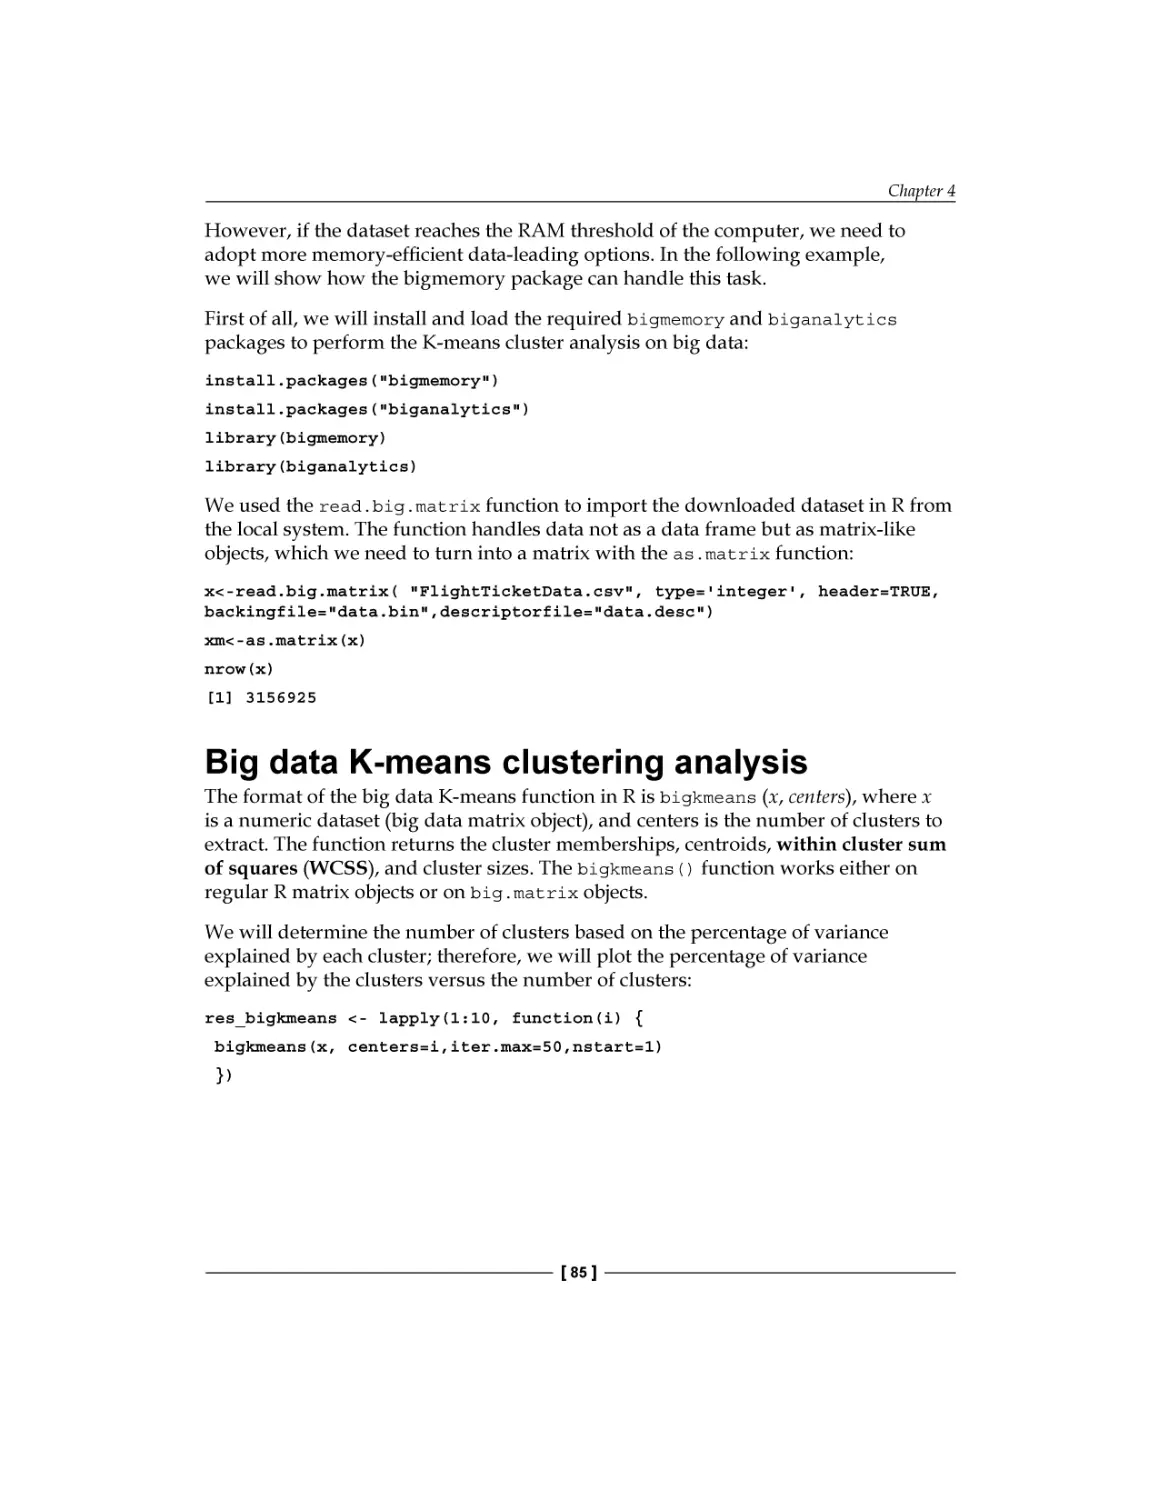 Big data K-means clustering analysis